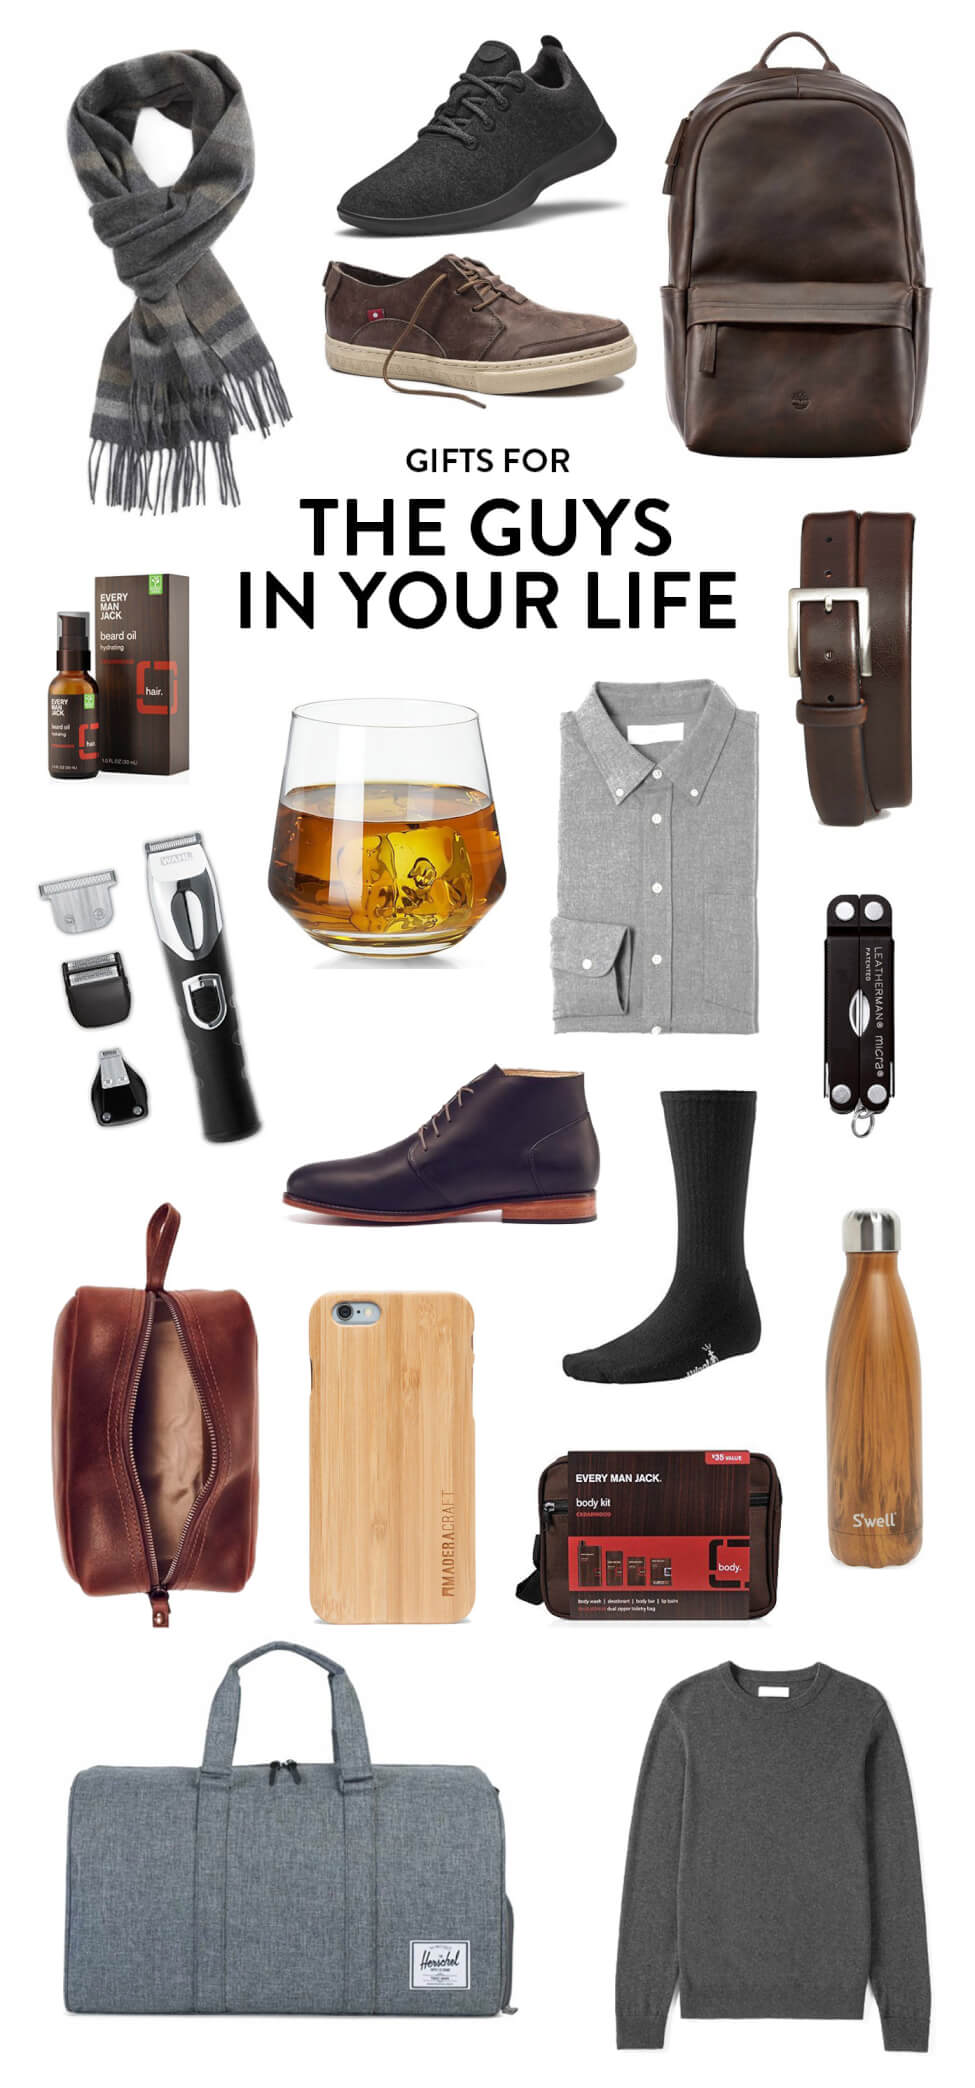 Holiday gifting ideas for the handsome men in your life, including everything from a cashmere scarf, to Allbirds, to Oliberte sneakers, to a leather backpack, belt, flannel shirt, sweater, water bottle, shaving kit, wooden iphone case, duffel bag, dop kit, shaver, and beard oil. | The Guys In Your Life Gift Guide | Gimme Some Oven Holidays 2017